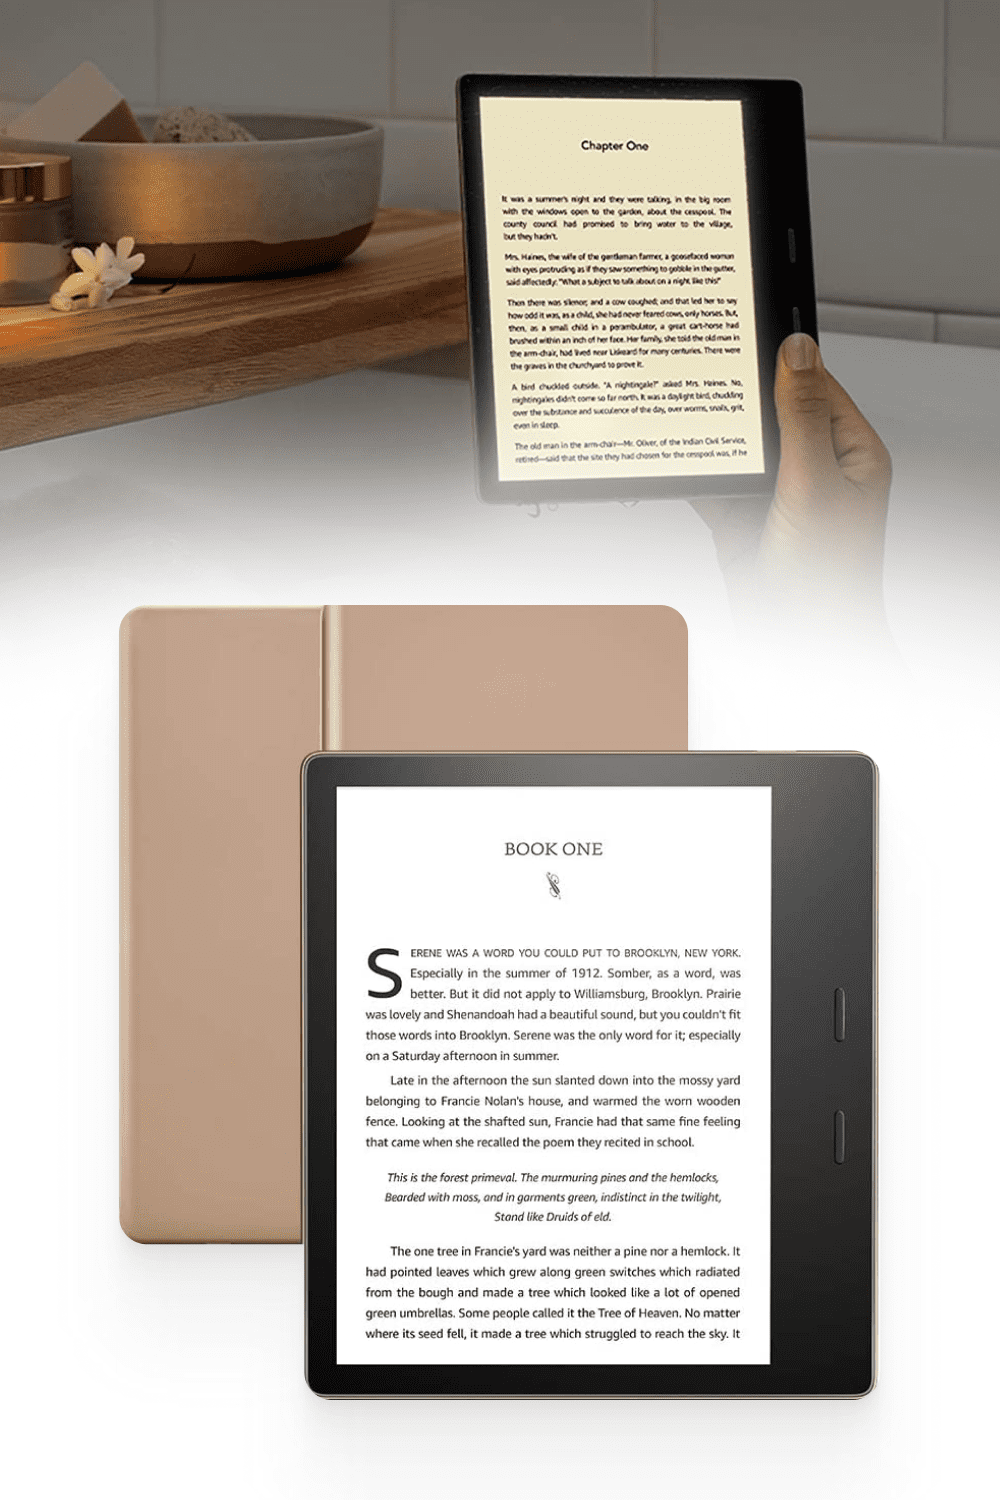 Kindle Oasis – With 7 inch display and page turn buttons.